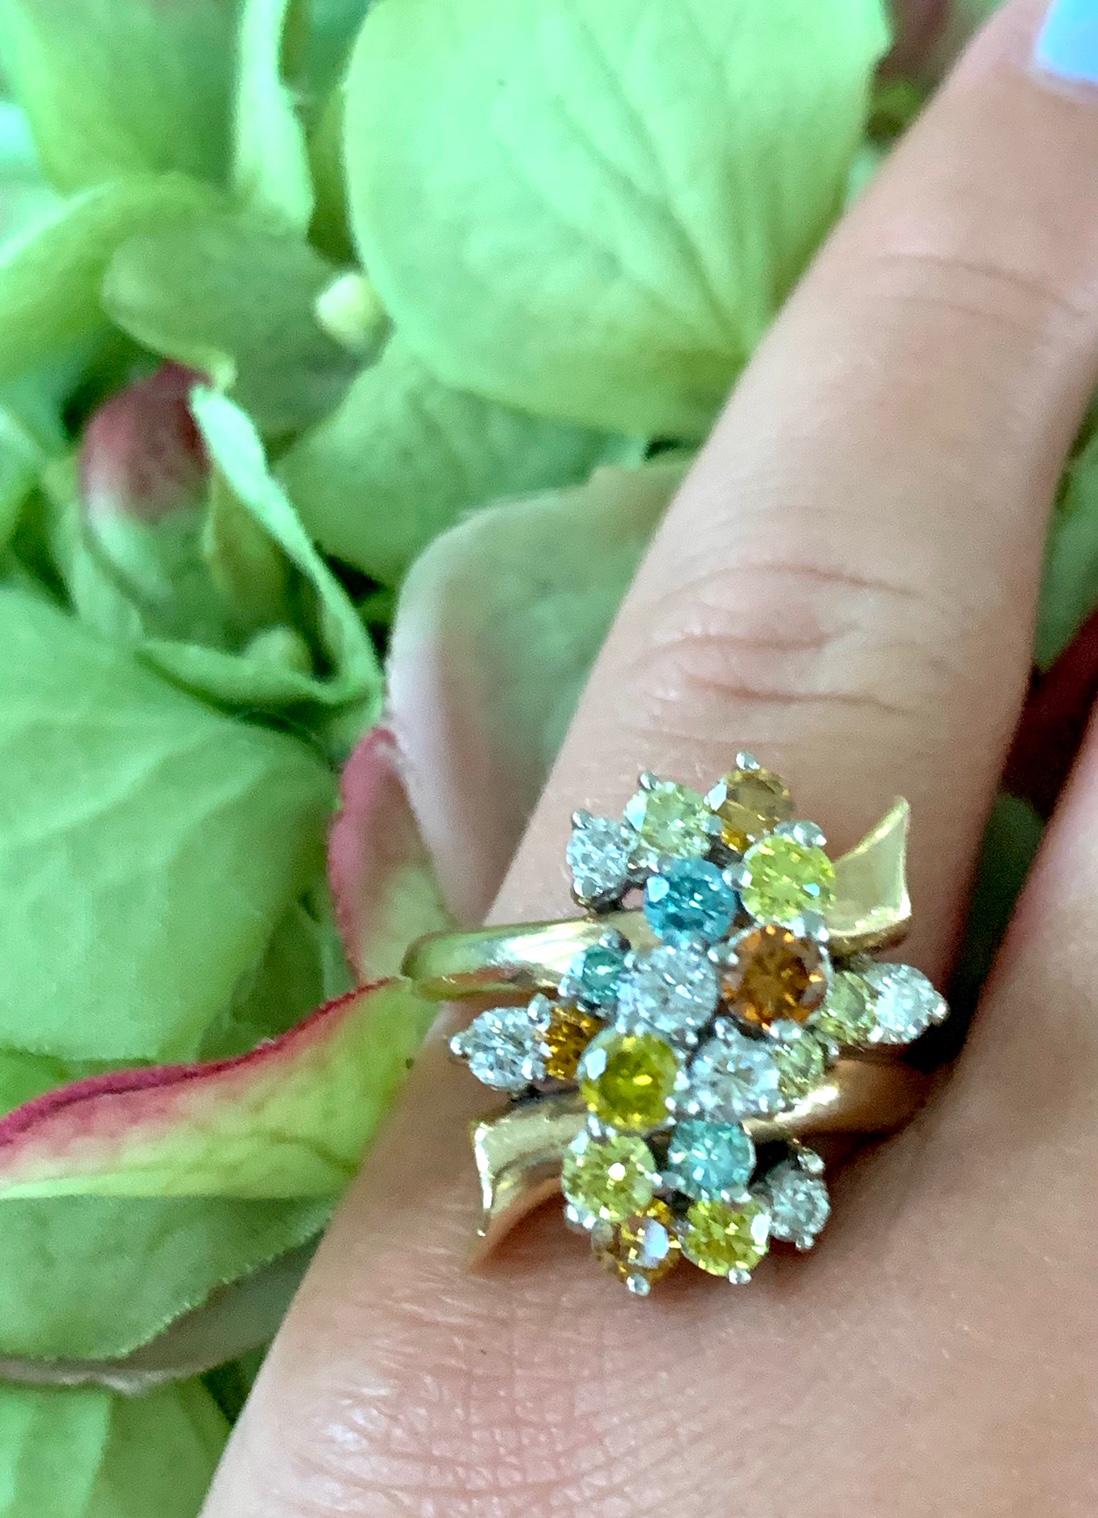 This fabulously unique ring features colored diamonds in a playful yellow gold setting.

White and irradiated diamond waterfall ring features diamonds in clear, blue, yellow and orange. 
There are 20 full cut diamonds approximately 1.75 carat total